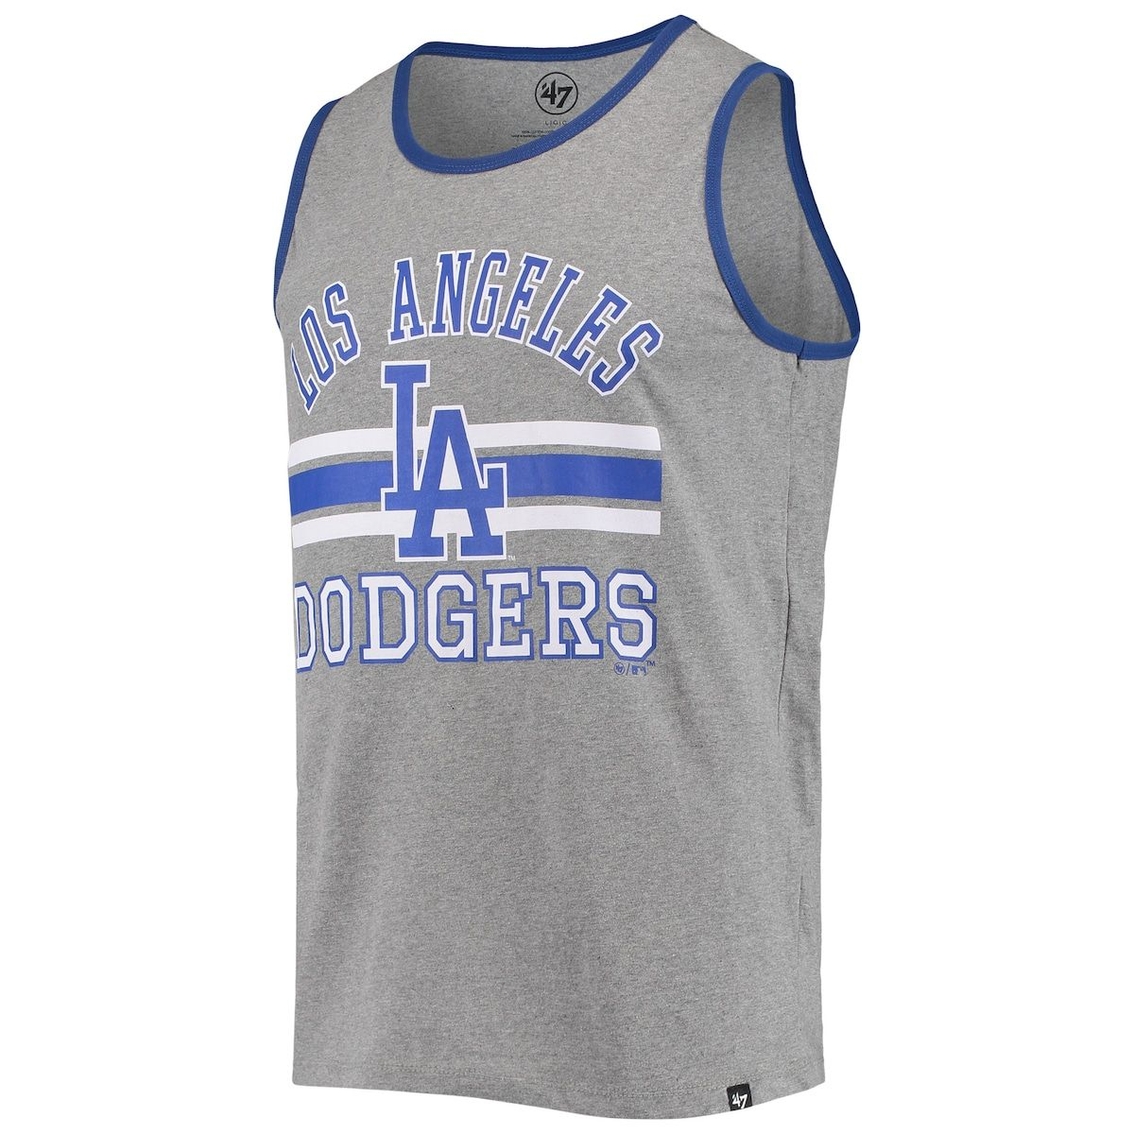 '47 Men's Heathered Gray Los Angeles Dodgers Edge Super Rival Tank Top - Image 3 of 4